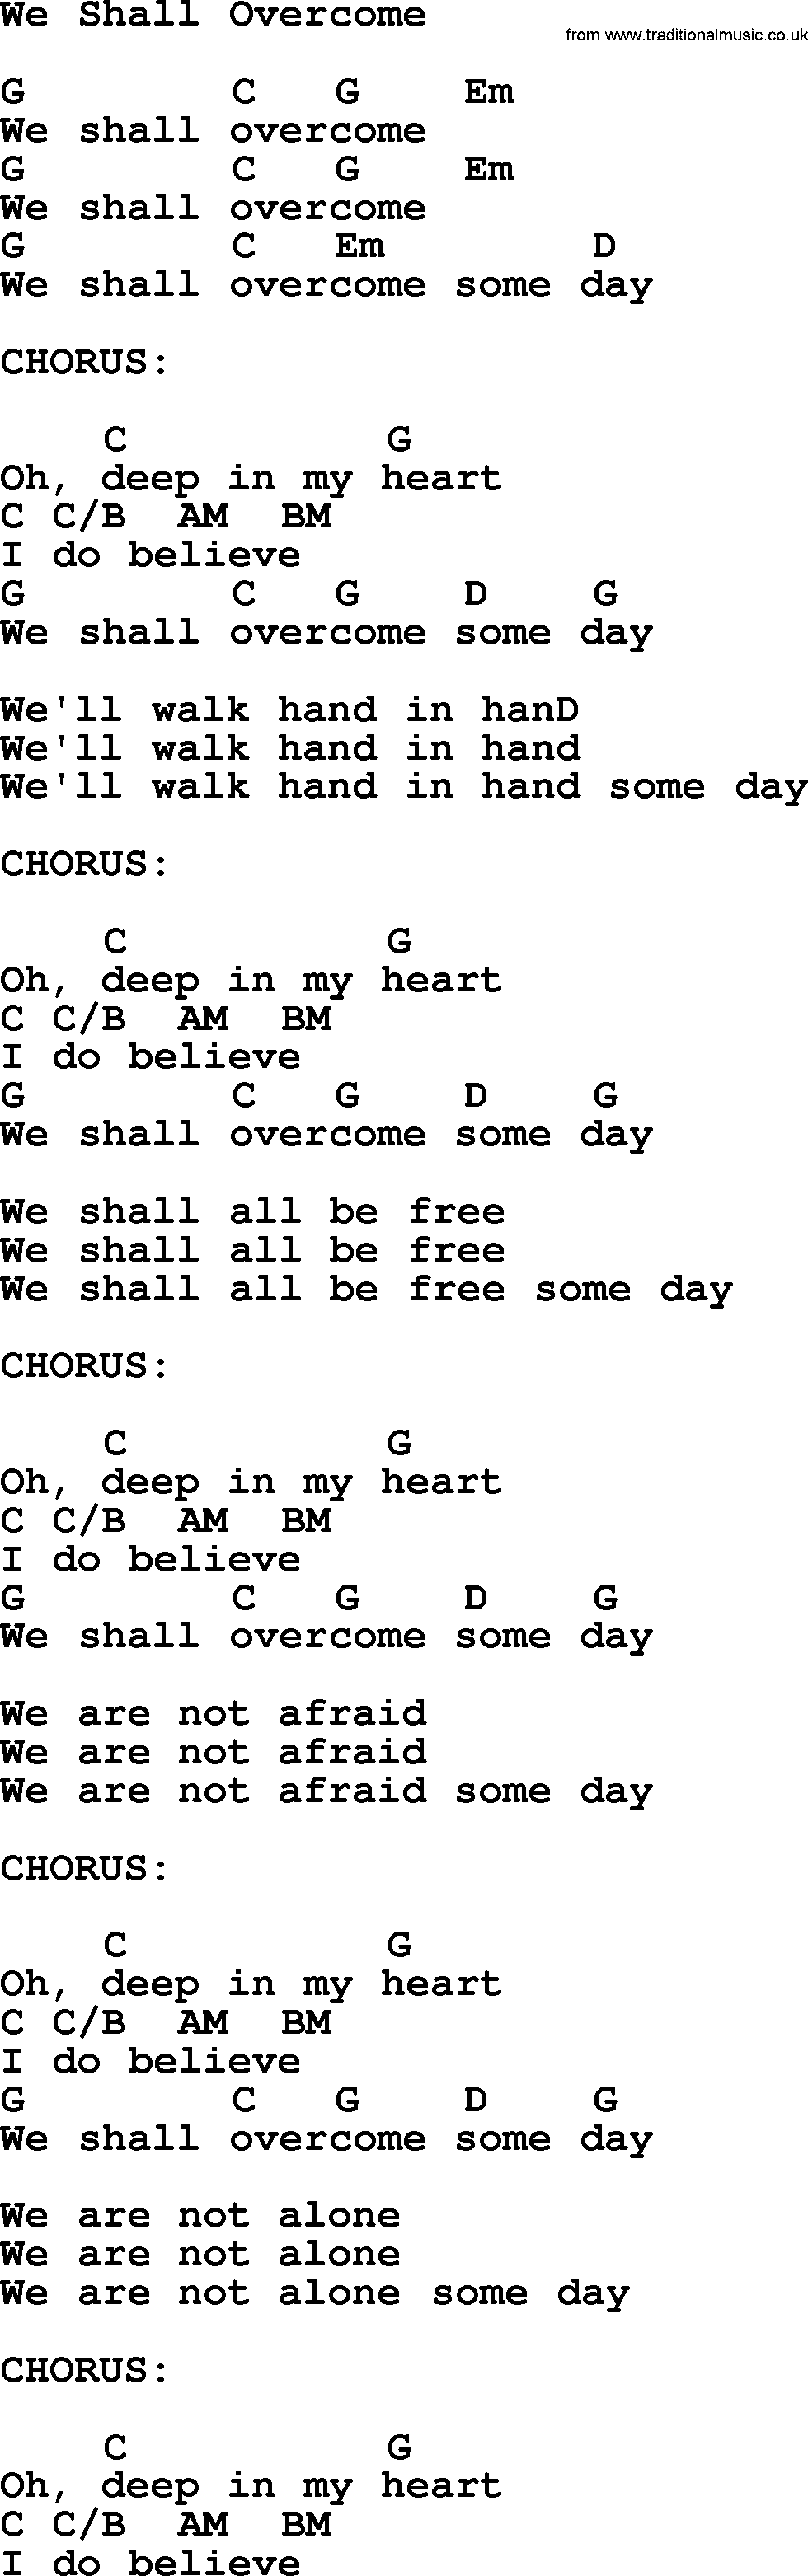 Top 1000 Most Popular Folk and Old-time Songs: We Shall Overcome, lyrics and chords